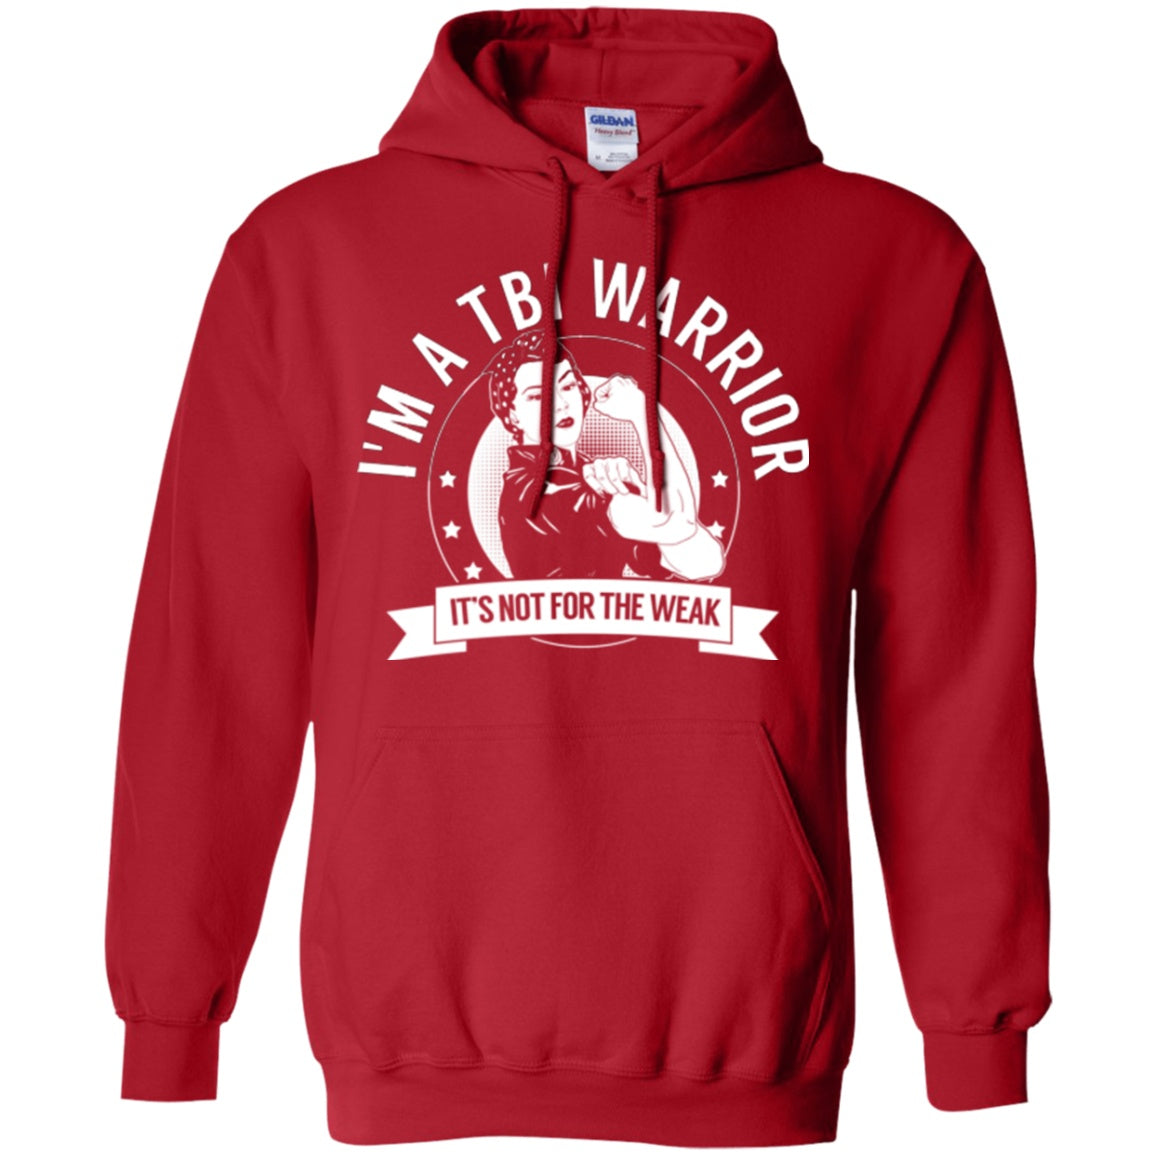 Traumatic Brain Injury - TBI Warrior Not For The Weak Pullover Hoodie 8 oz. - The Unchargeables